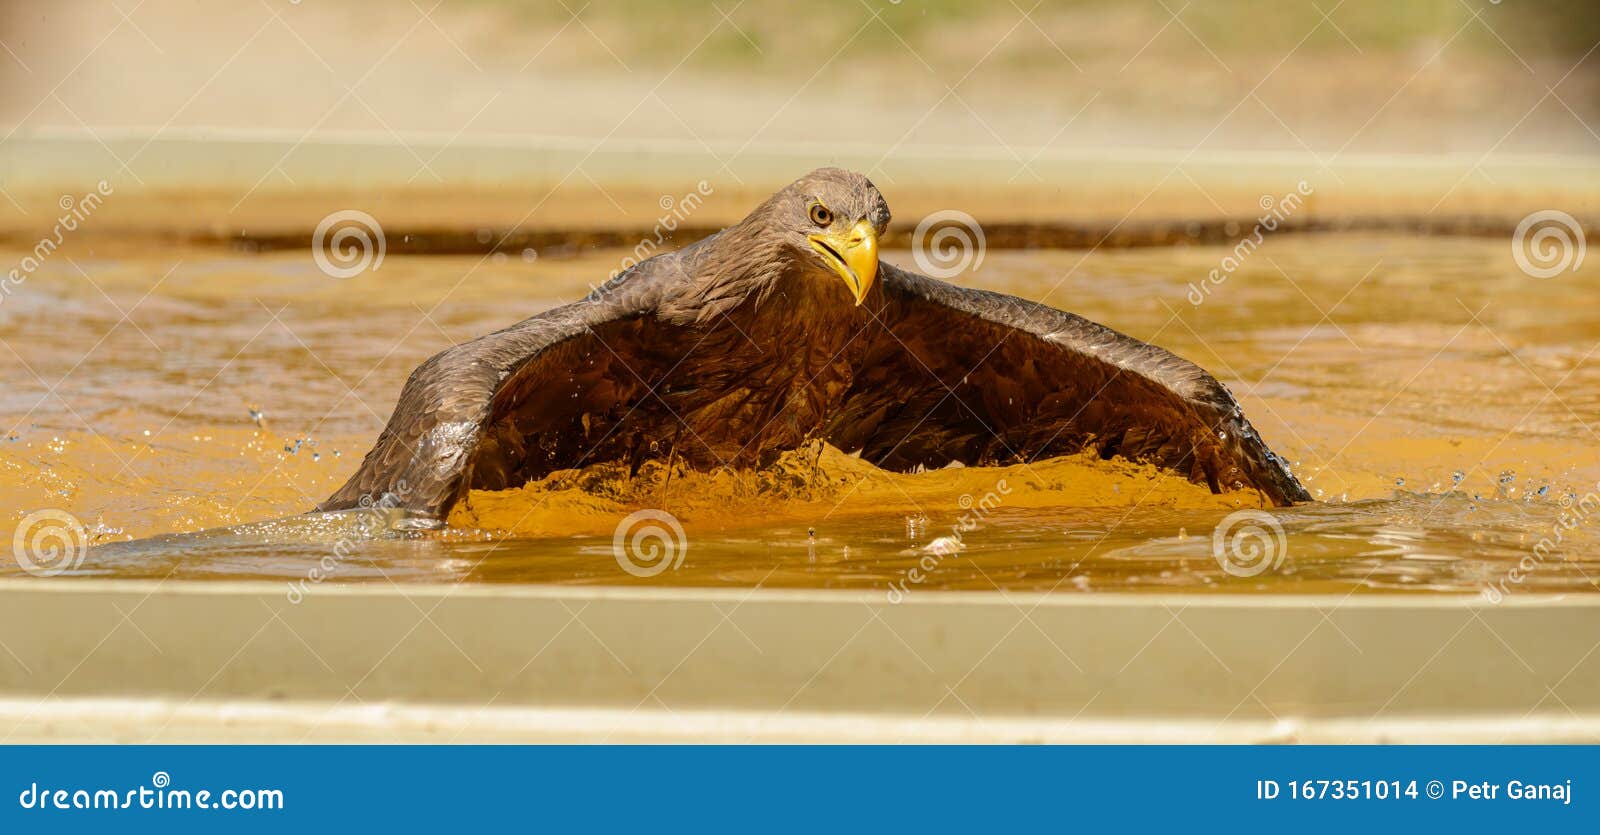 An Eagle Swimming in Pool of Water Stock Photo - of flying, glide: 167351014